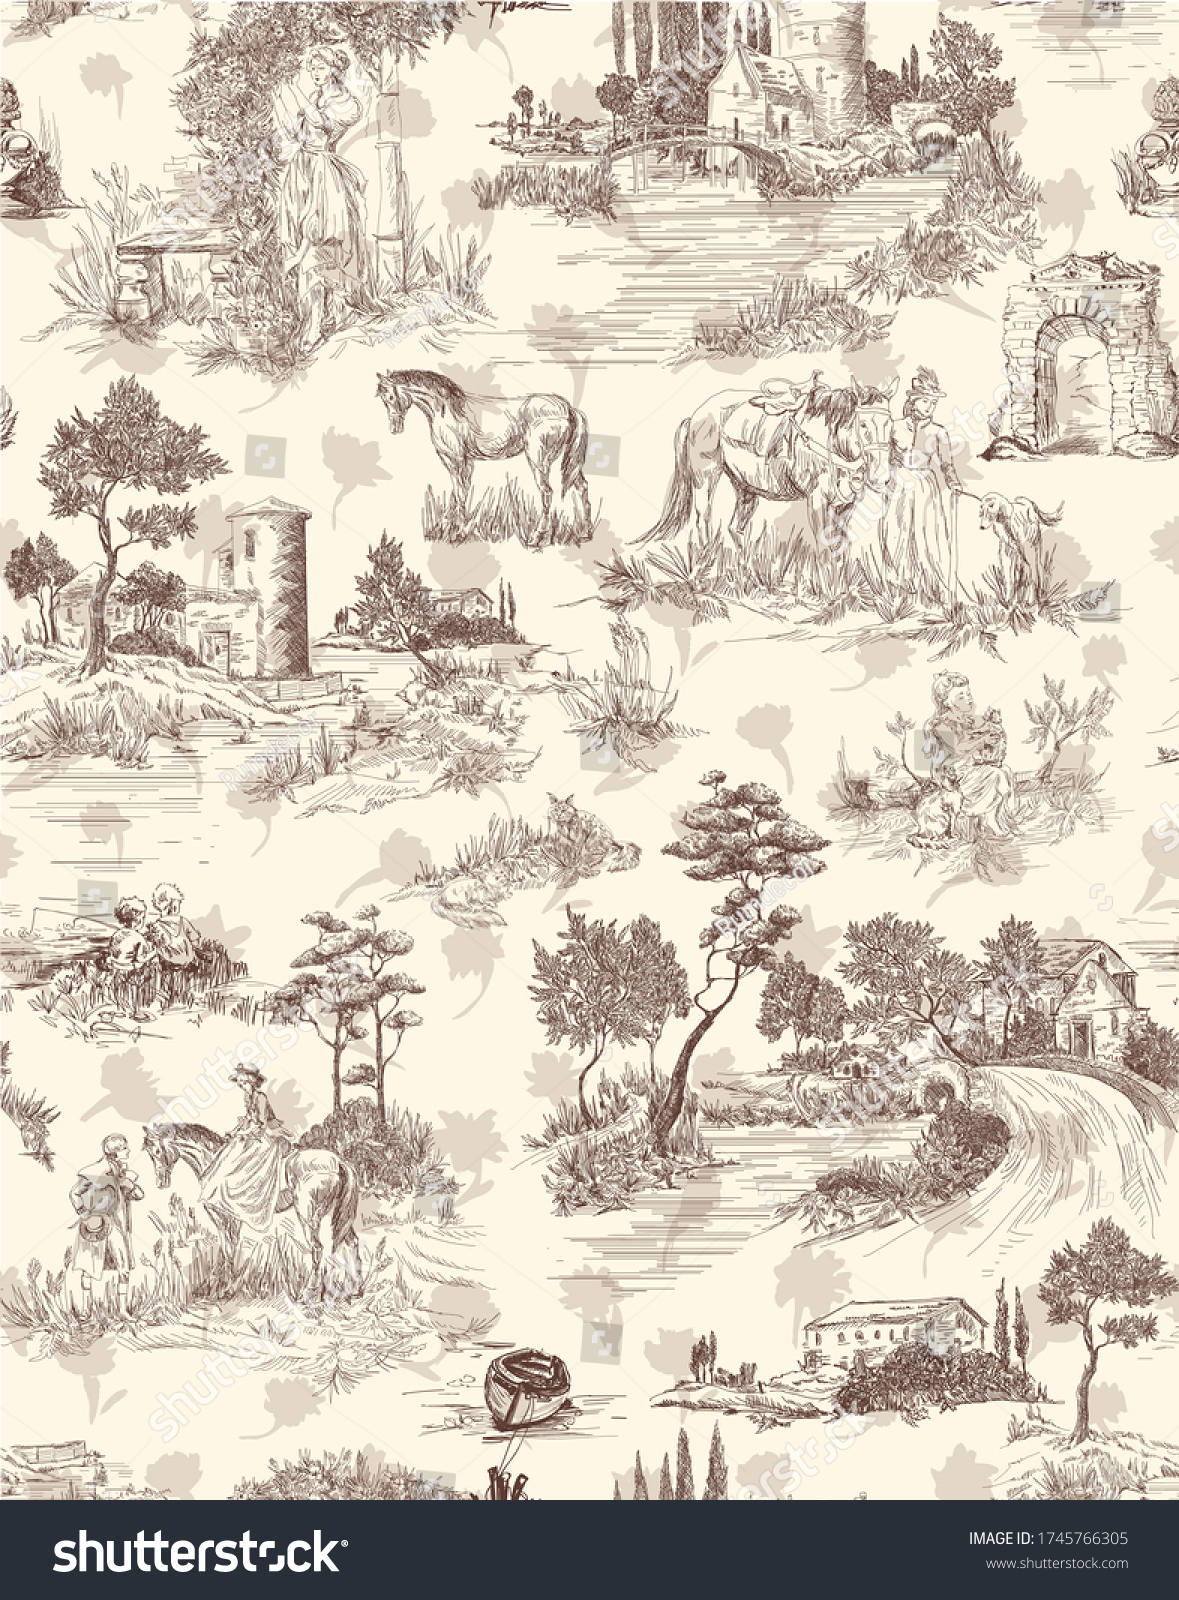 SVG of Pattern in toile de jouy stile with landscape with castles, river and houses and trees, walking people, woman with flowers, horse im beige and brown color svg